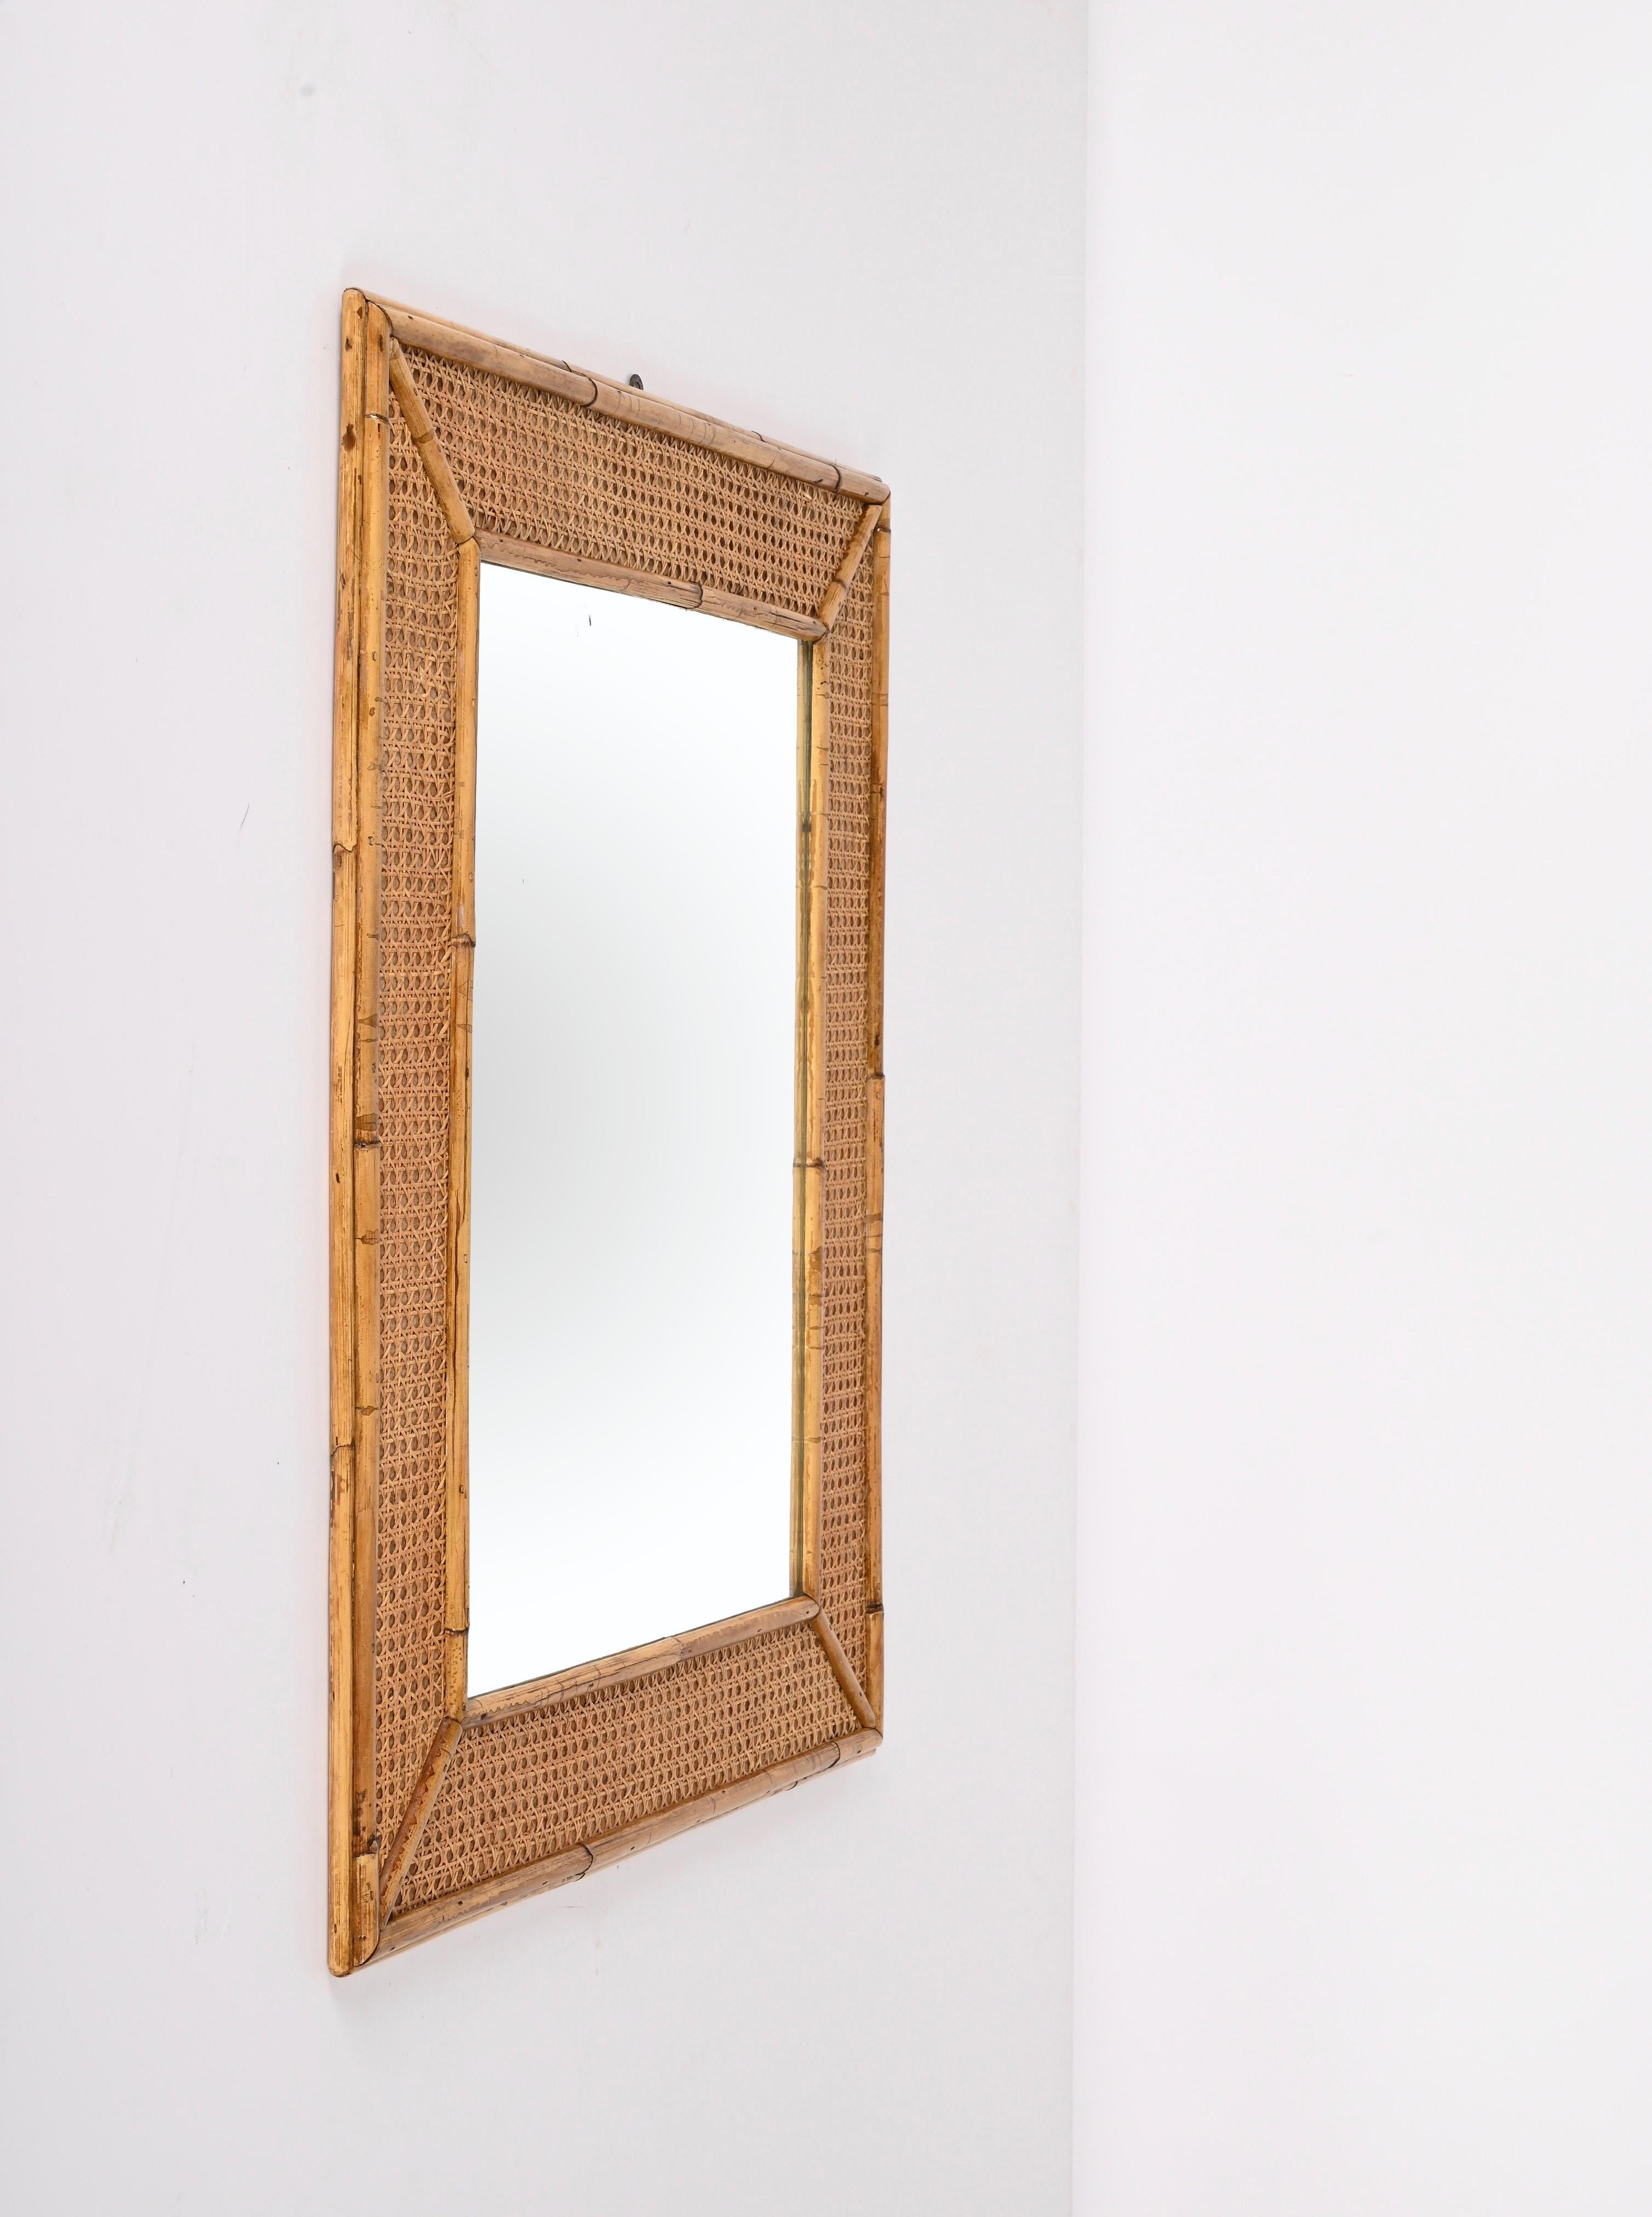 Midcentury Rectangular Italian Mirror with Bamboo and Vienna Straw Frame, 1970s For Sale 4